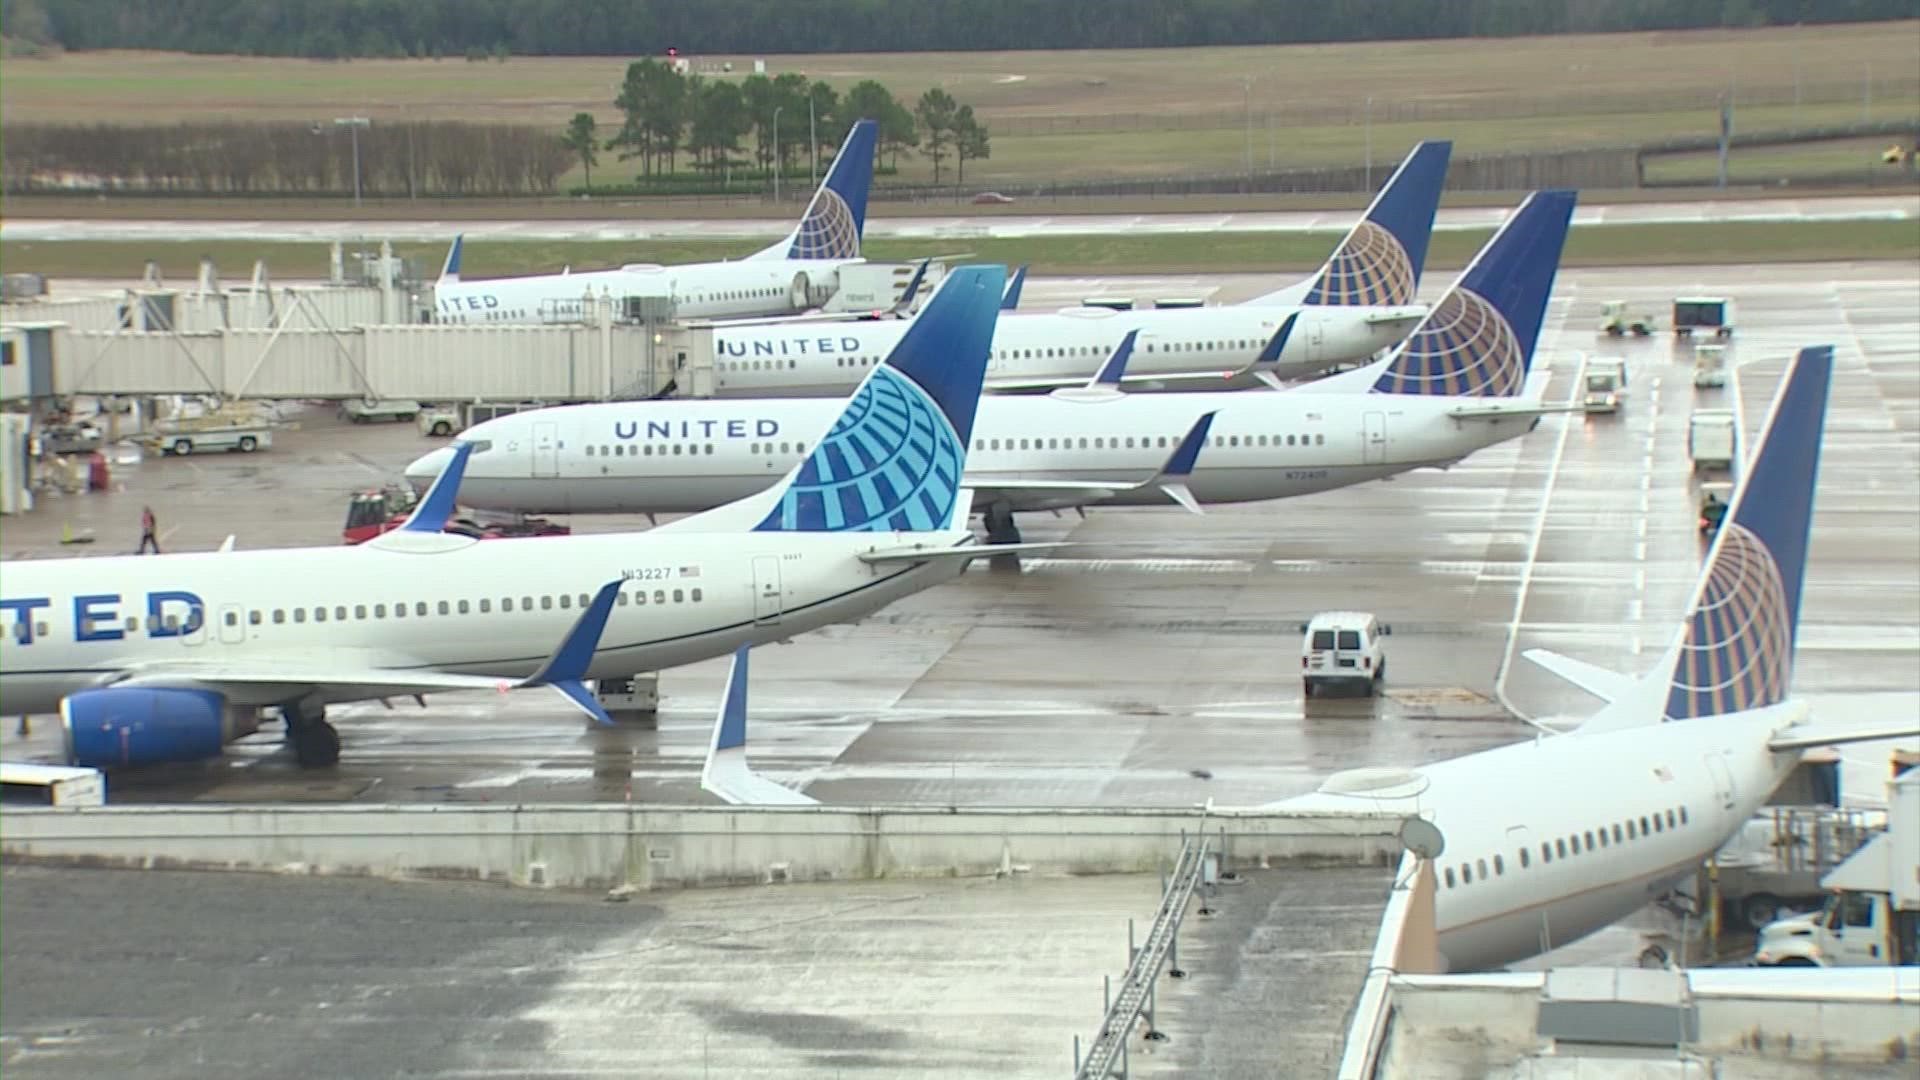 Airport officials said United Flight 128 was coming in from Rio De Janeiro when it experienced unexpected turbulence.